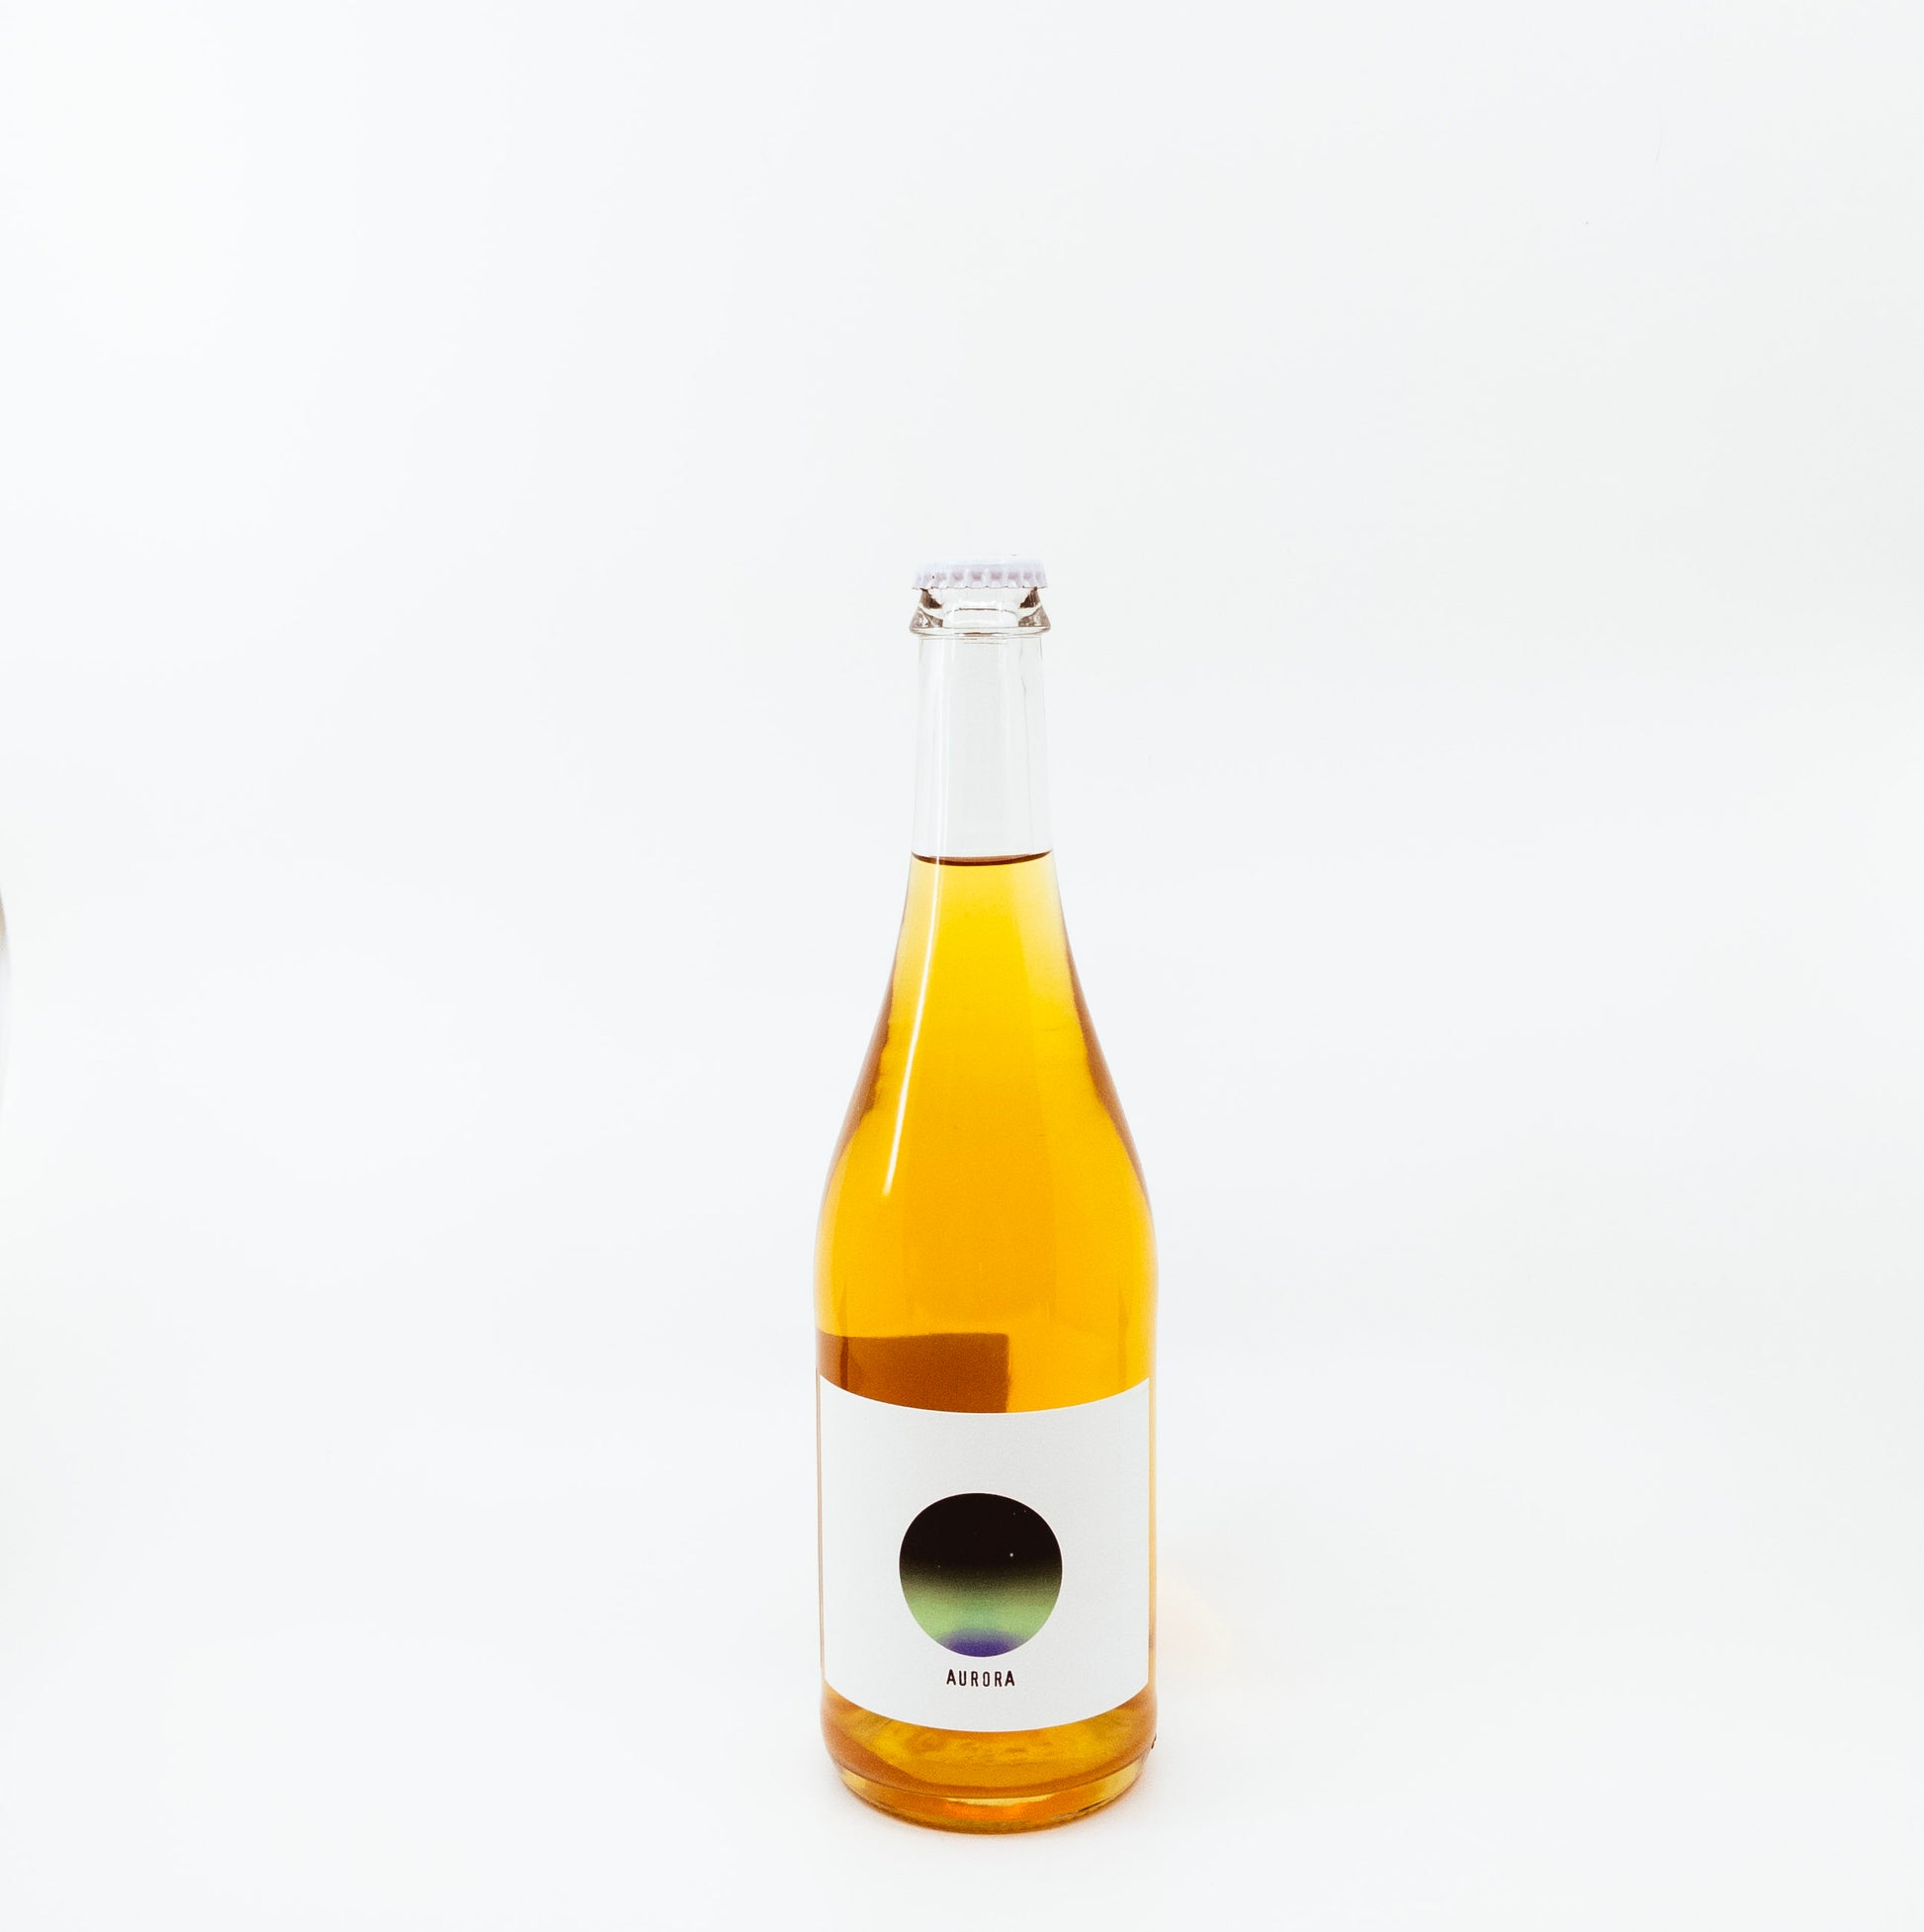 yellow glass bottle with dark circle on white label